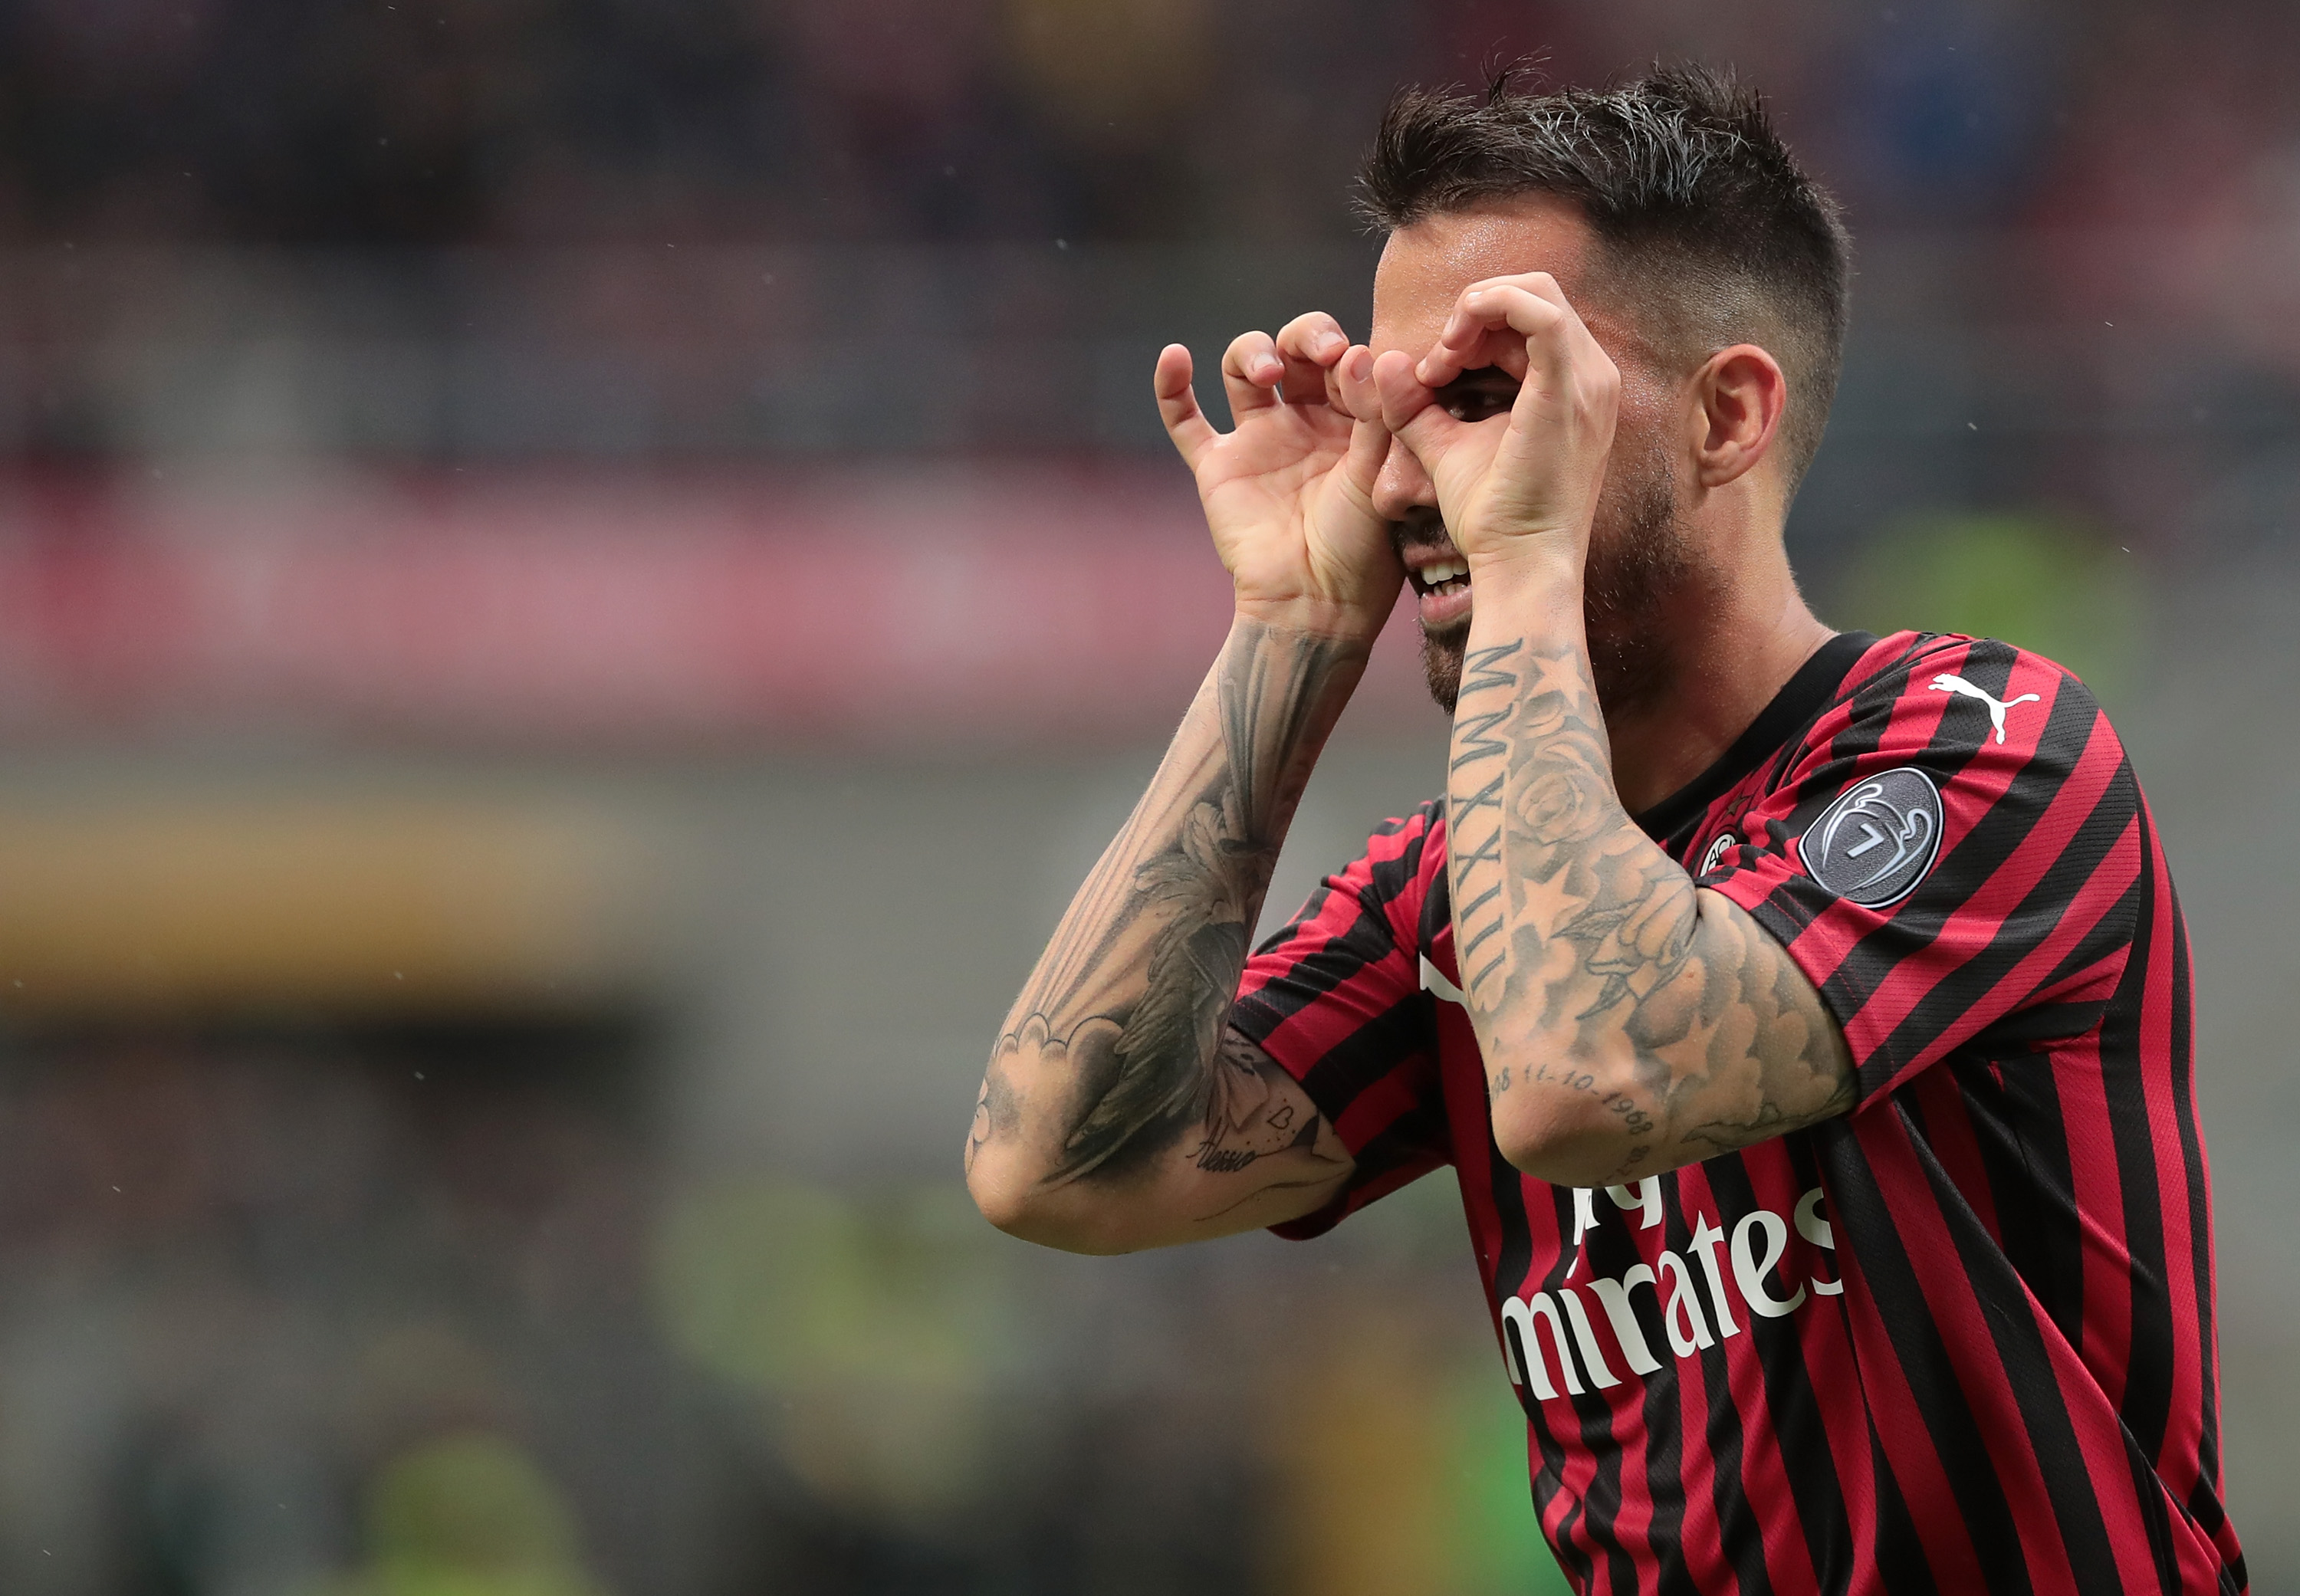 MILAN, ITALY - MAY 19:  Fernandez Suso of AC Milan celebrates his goal during the Serie A match between AC Milan and Frosinone Calcio at Stadio Giuseppe Meazza on May 19, 2019 in Milan, Italy.  (Photo by Emilio Andreoli/Getty Images)